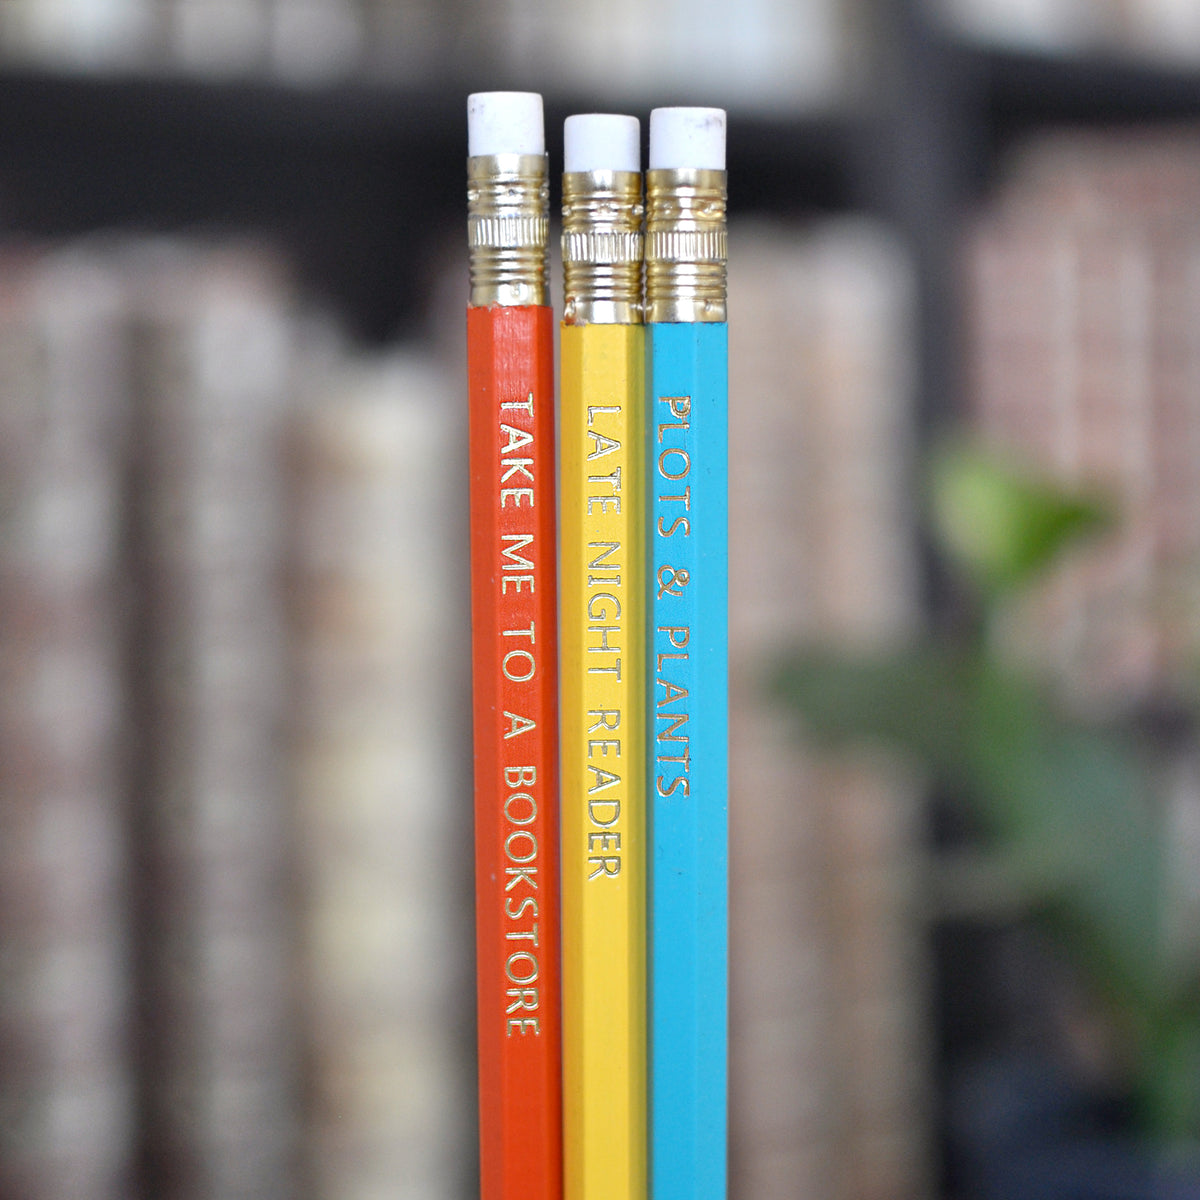 Three Pencils and Bookmark Set for Readers - Late Night Reader, Take Me To A Bookstore, Plots &amp; Plants foil stamped pencils